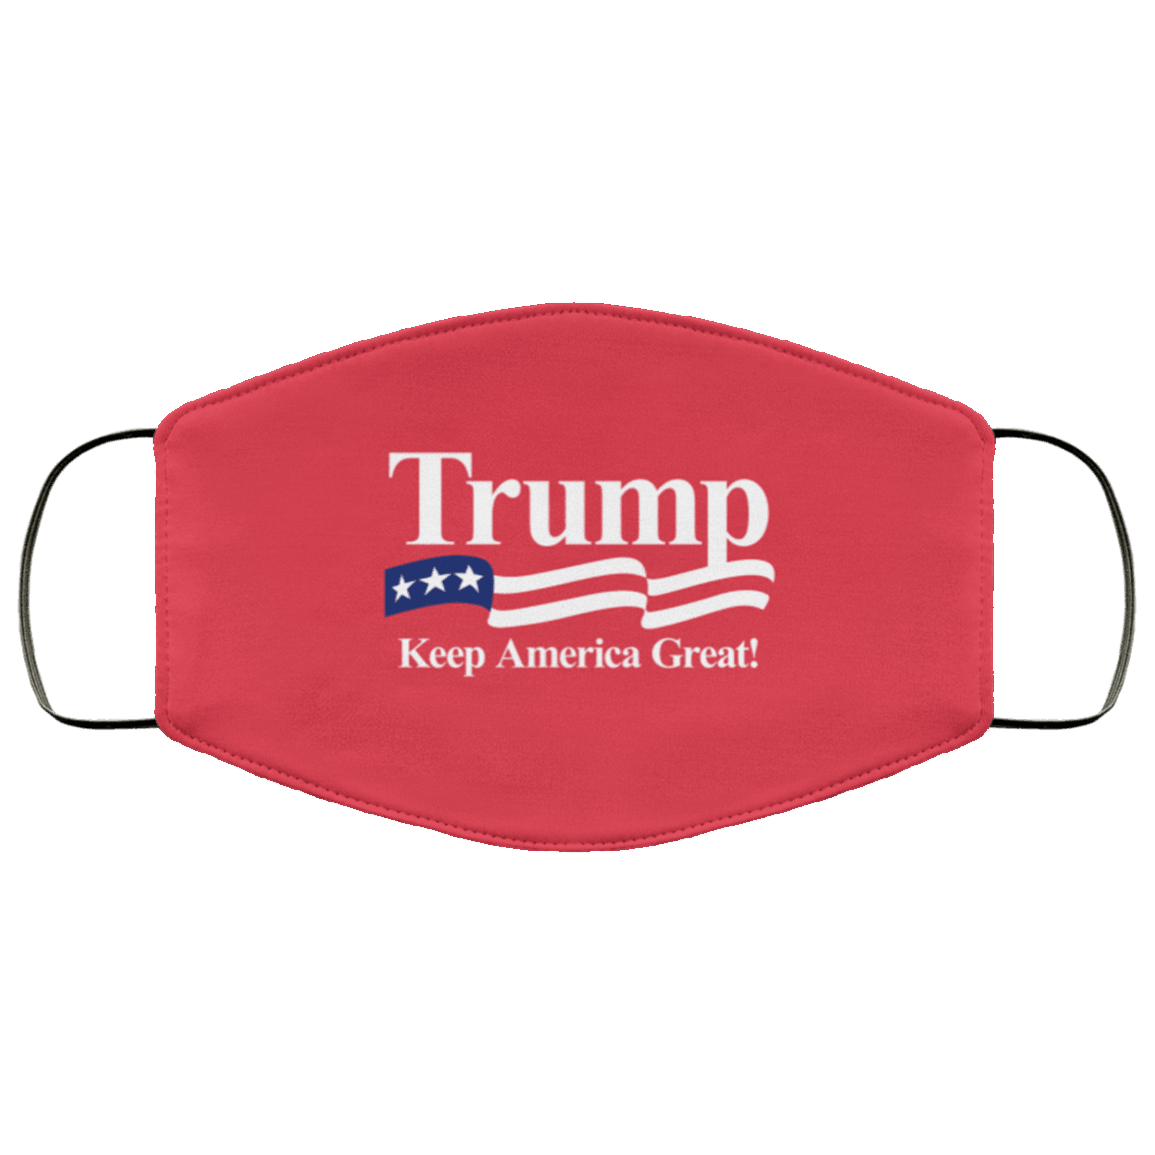 Designs by MyUtopia Shout Out:Trump Keep America Great Adult Fabric Face Mask with Elastic Ear Loops,3 Layer Fabric Face Mask / Red / Adult,Fabric Face Mask